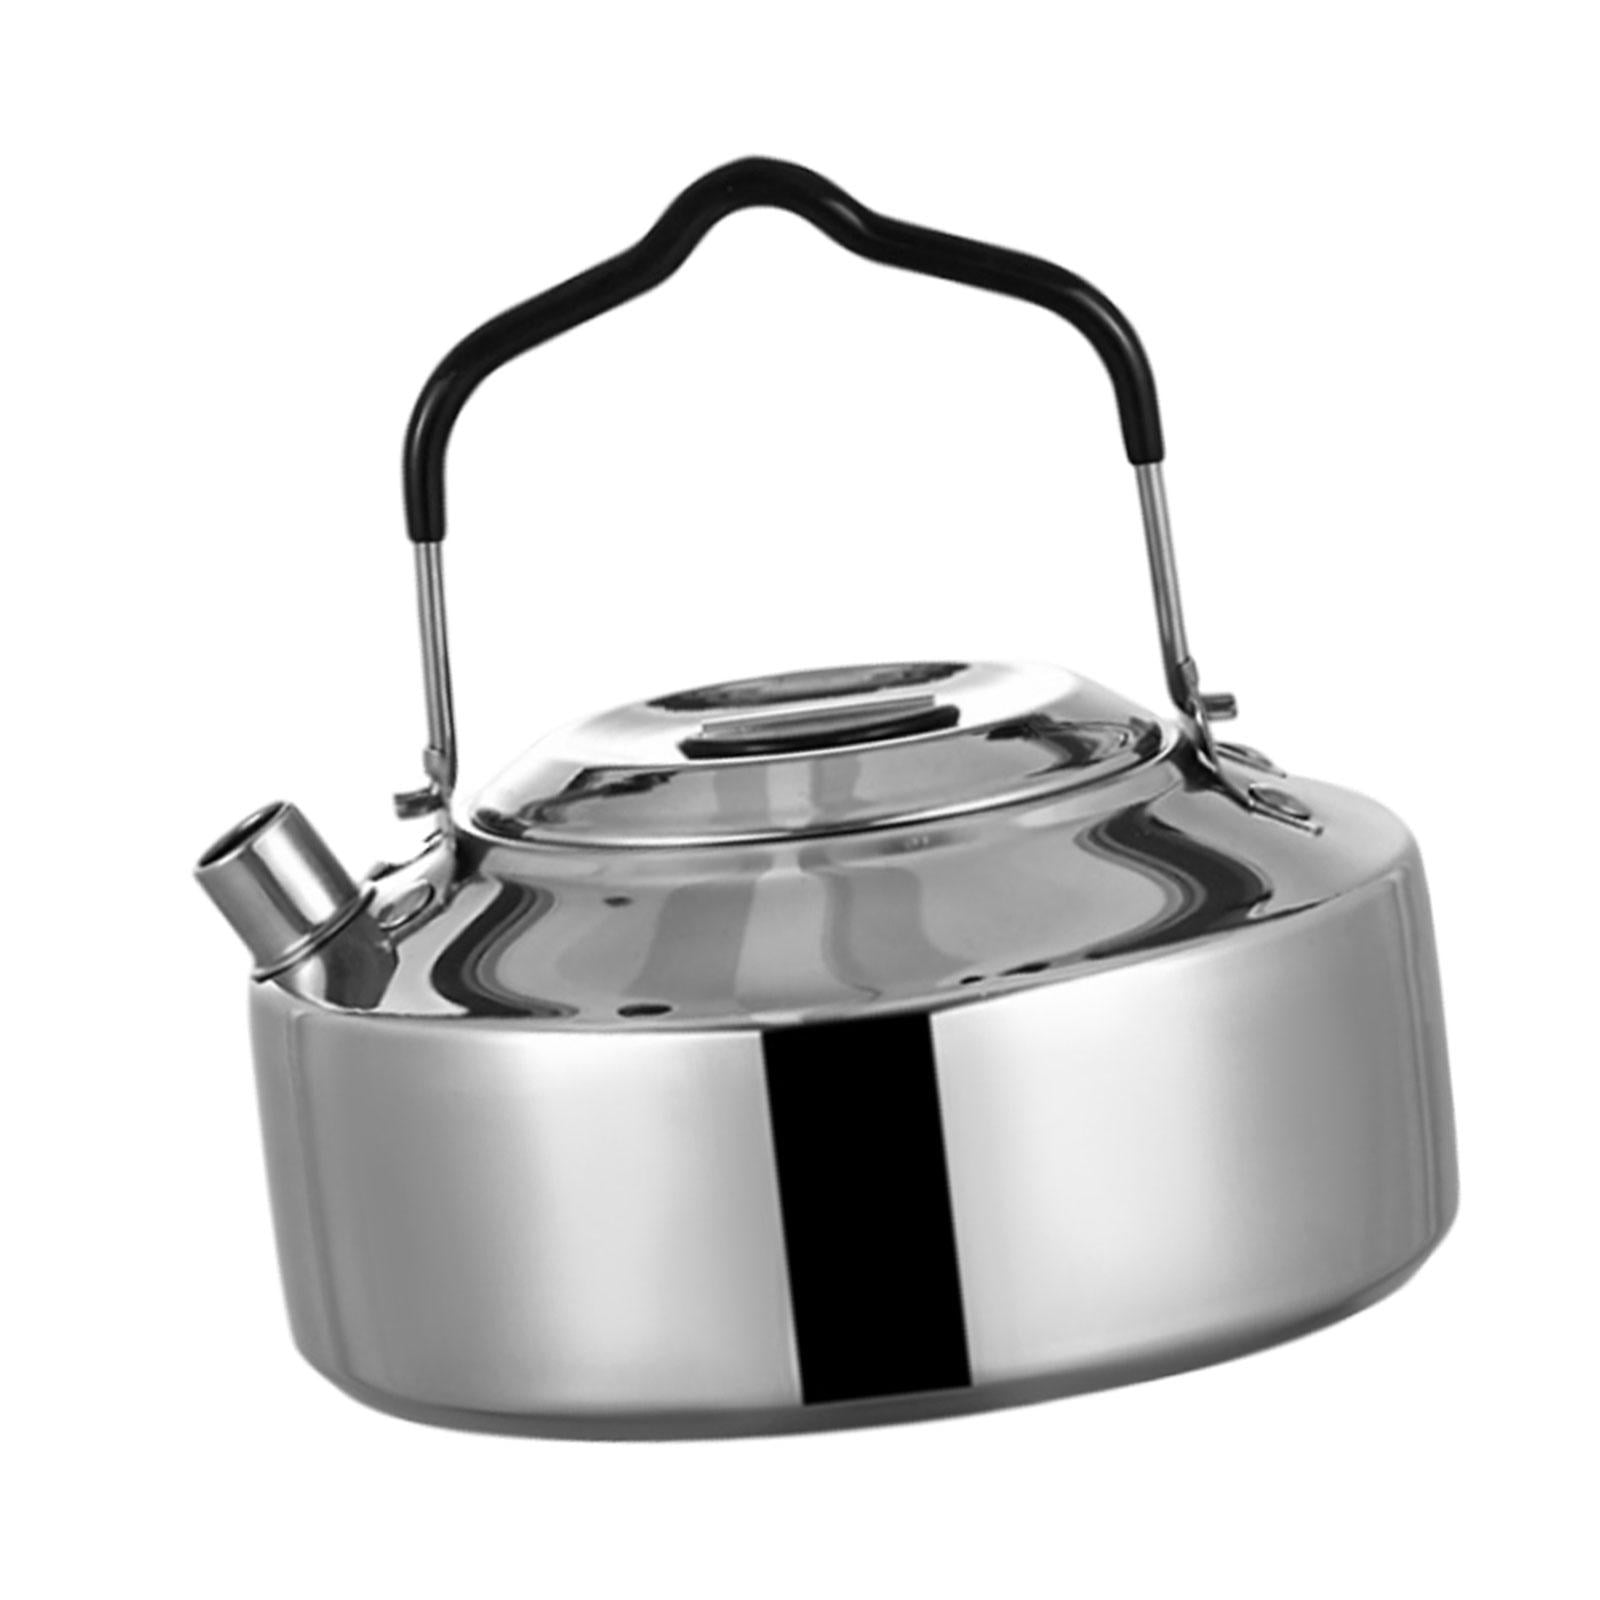 Glacier Stainless 1 Liter Tea Kettle, Camping Cookware